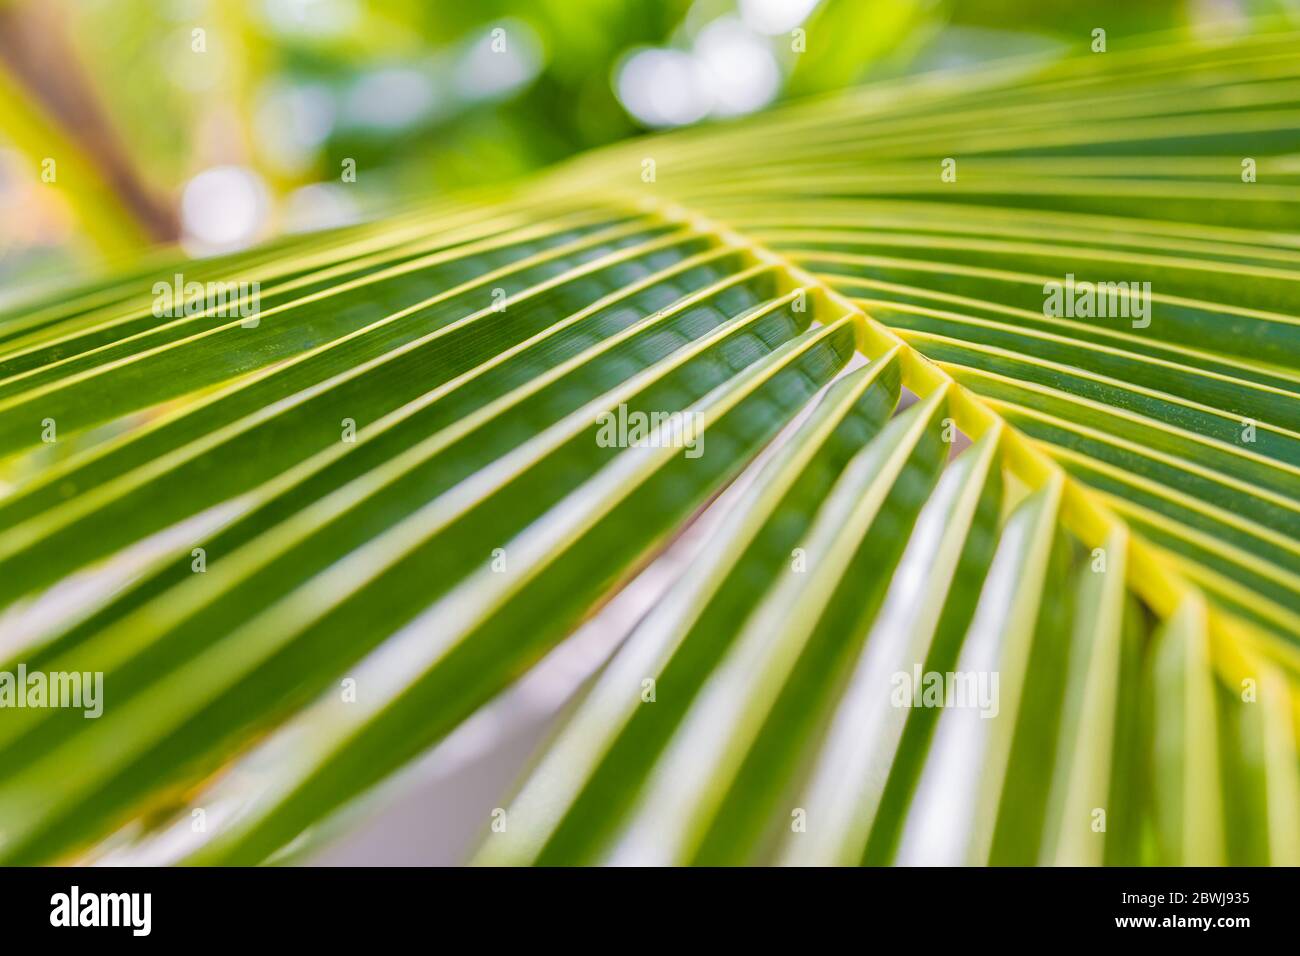 Drop of water on tropical banana palm leaf, dark green foliage, nature background. Exotic nature pattern Stock Photo